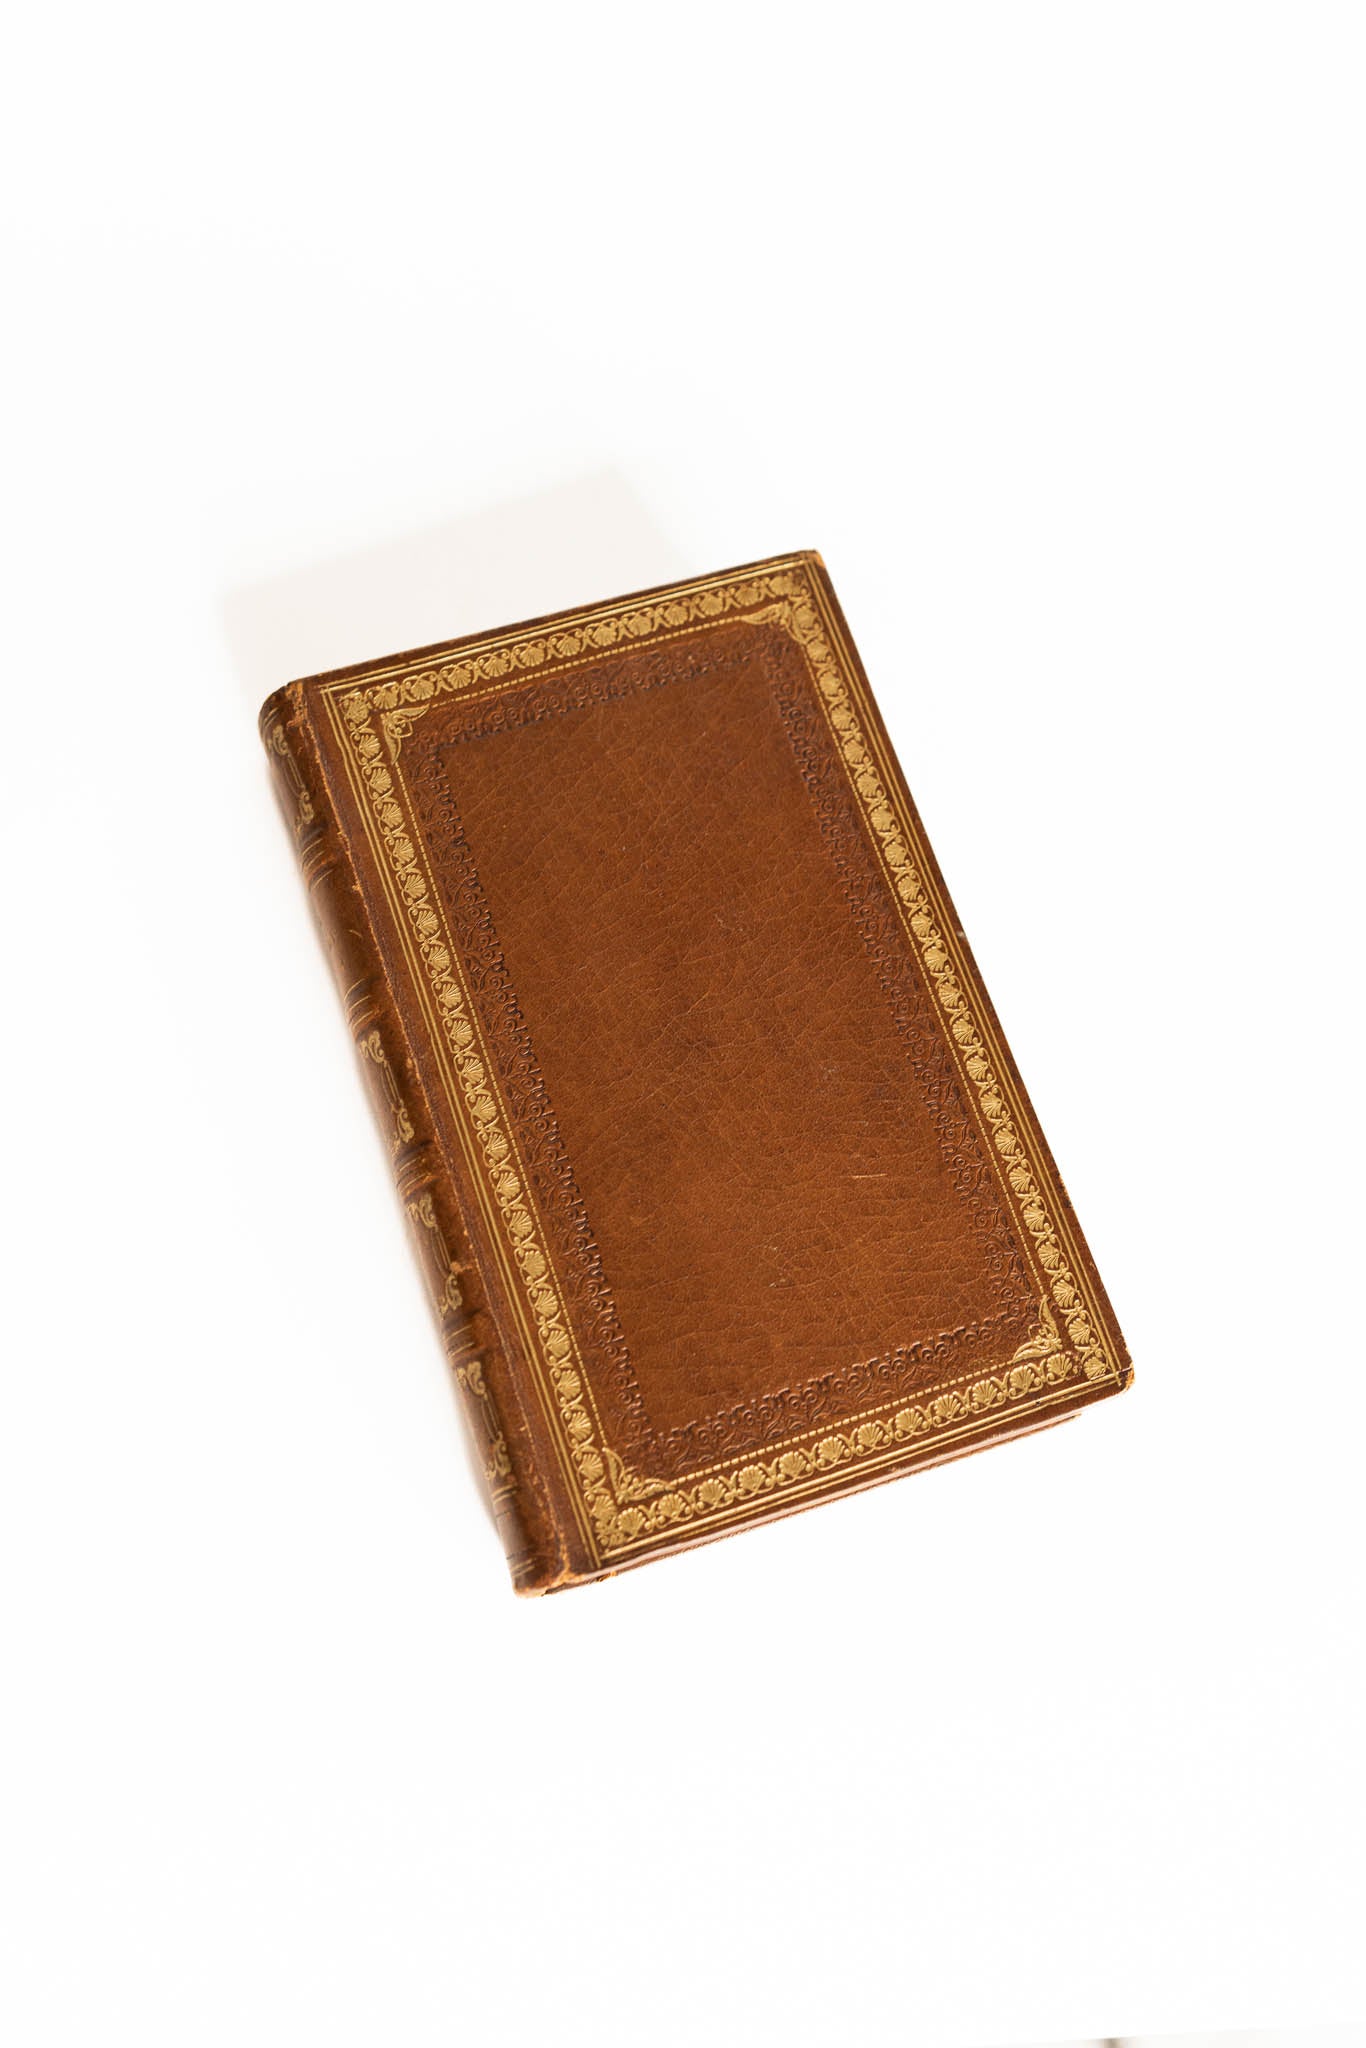 "The Birthday" 1836 Leatherbound Book